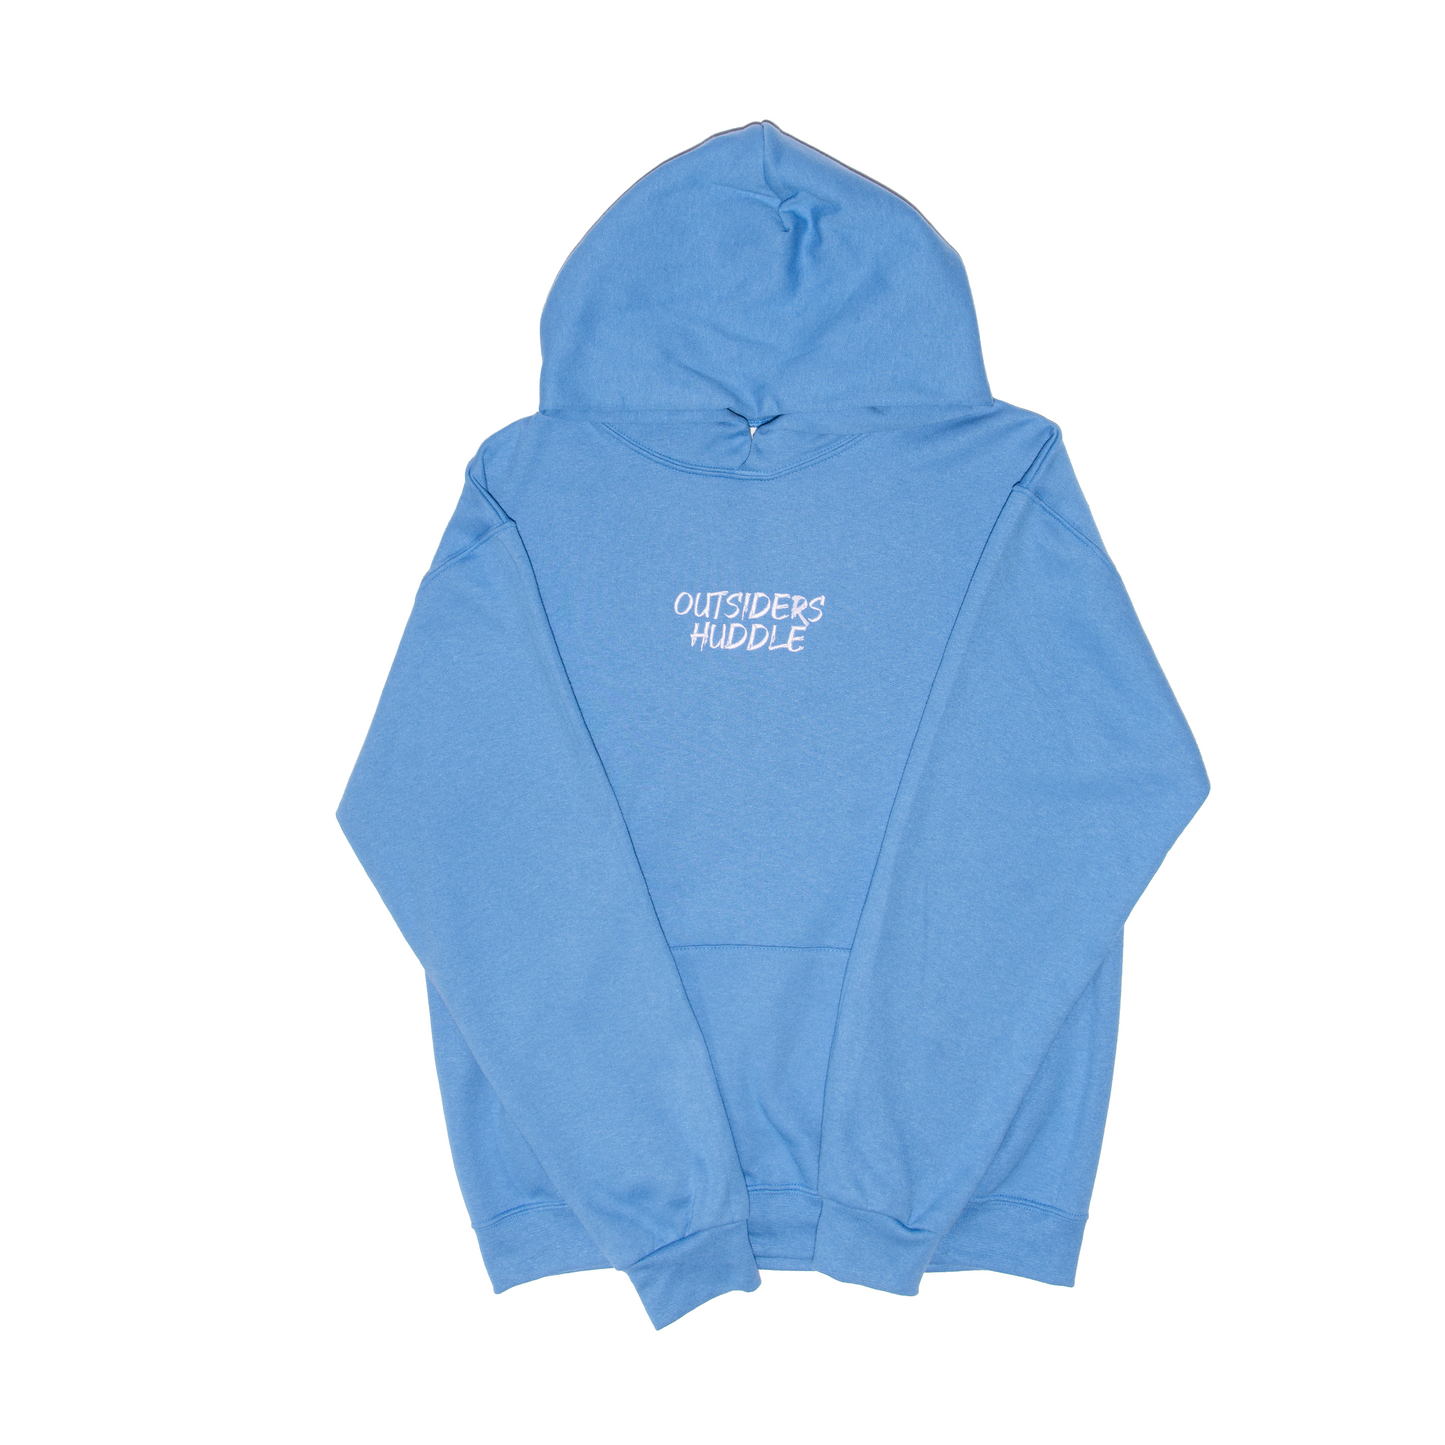 OH Embroidered "Sketch" Hoodies